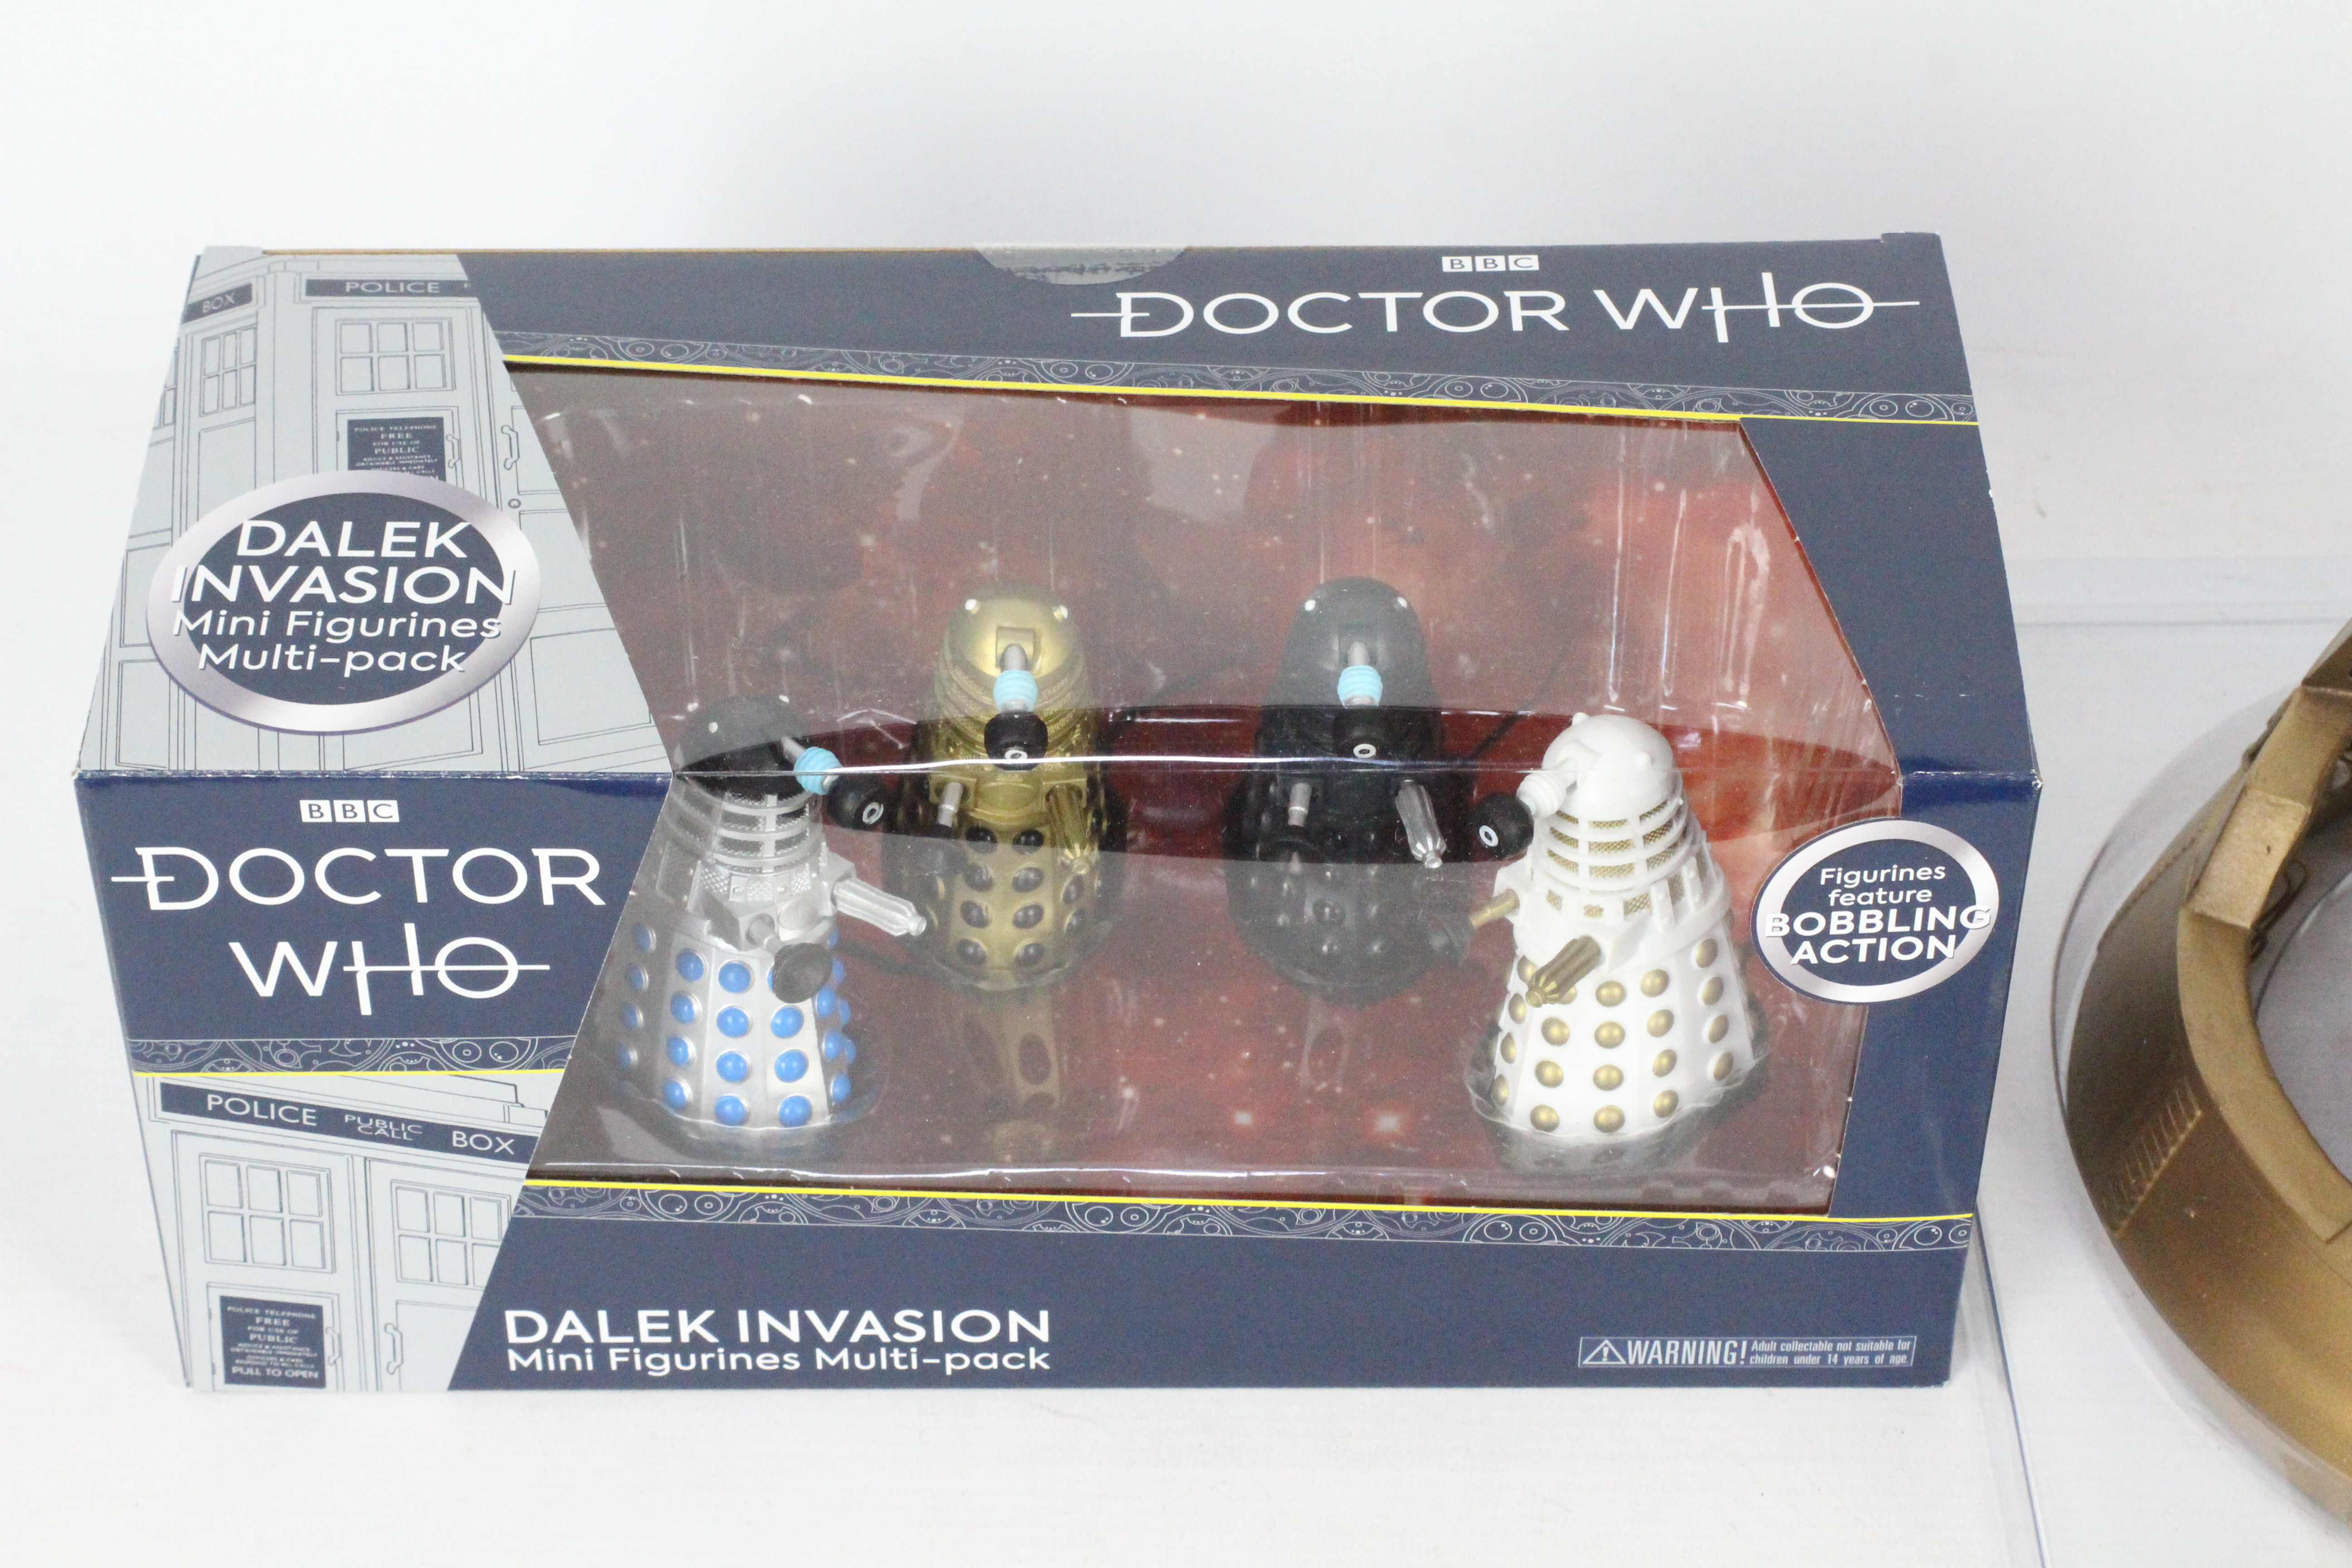 Eaglemoss, Big Chief Studios, BBC - Two boxed Doctor Who themed action figure sets. - Image 2 of 4